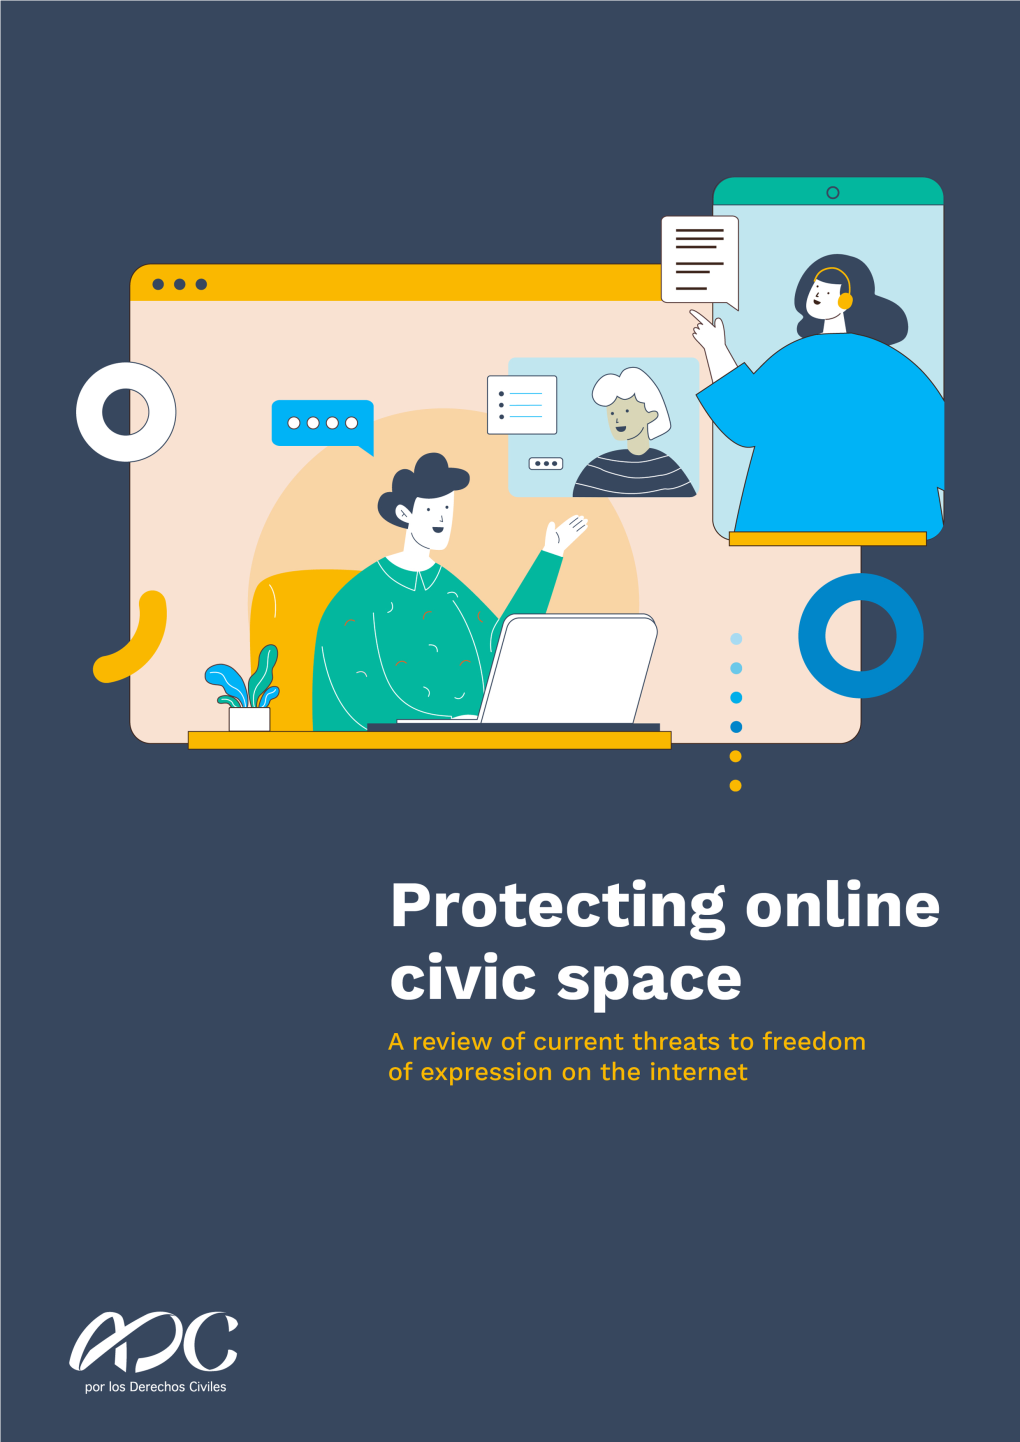 ADC-Protecting-Oinline-Civic-Space-7